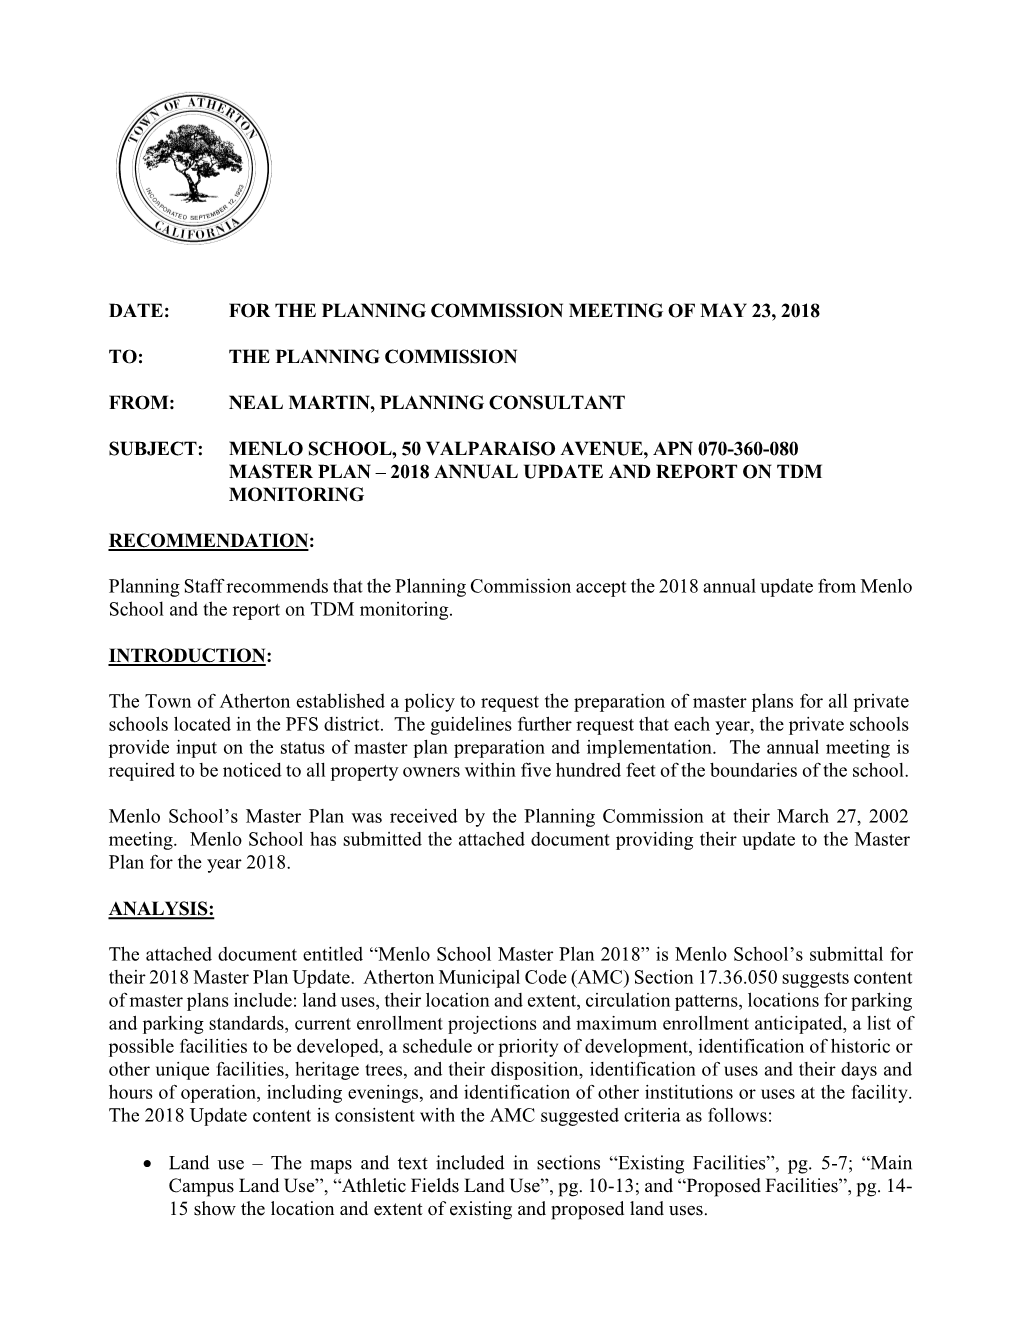 Date: for the Planning Commission Meeting of May 23, 2018